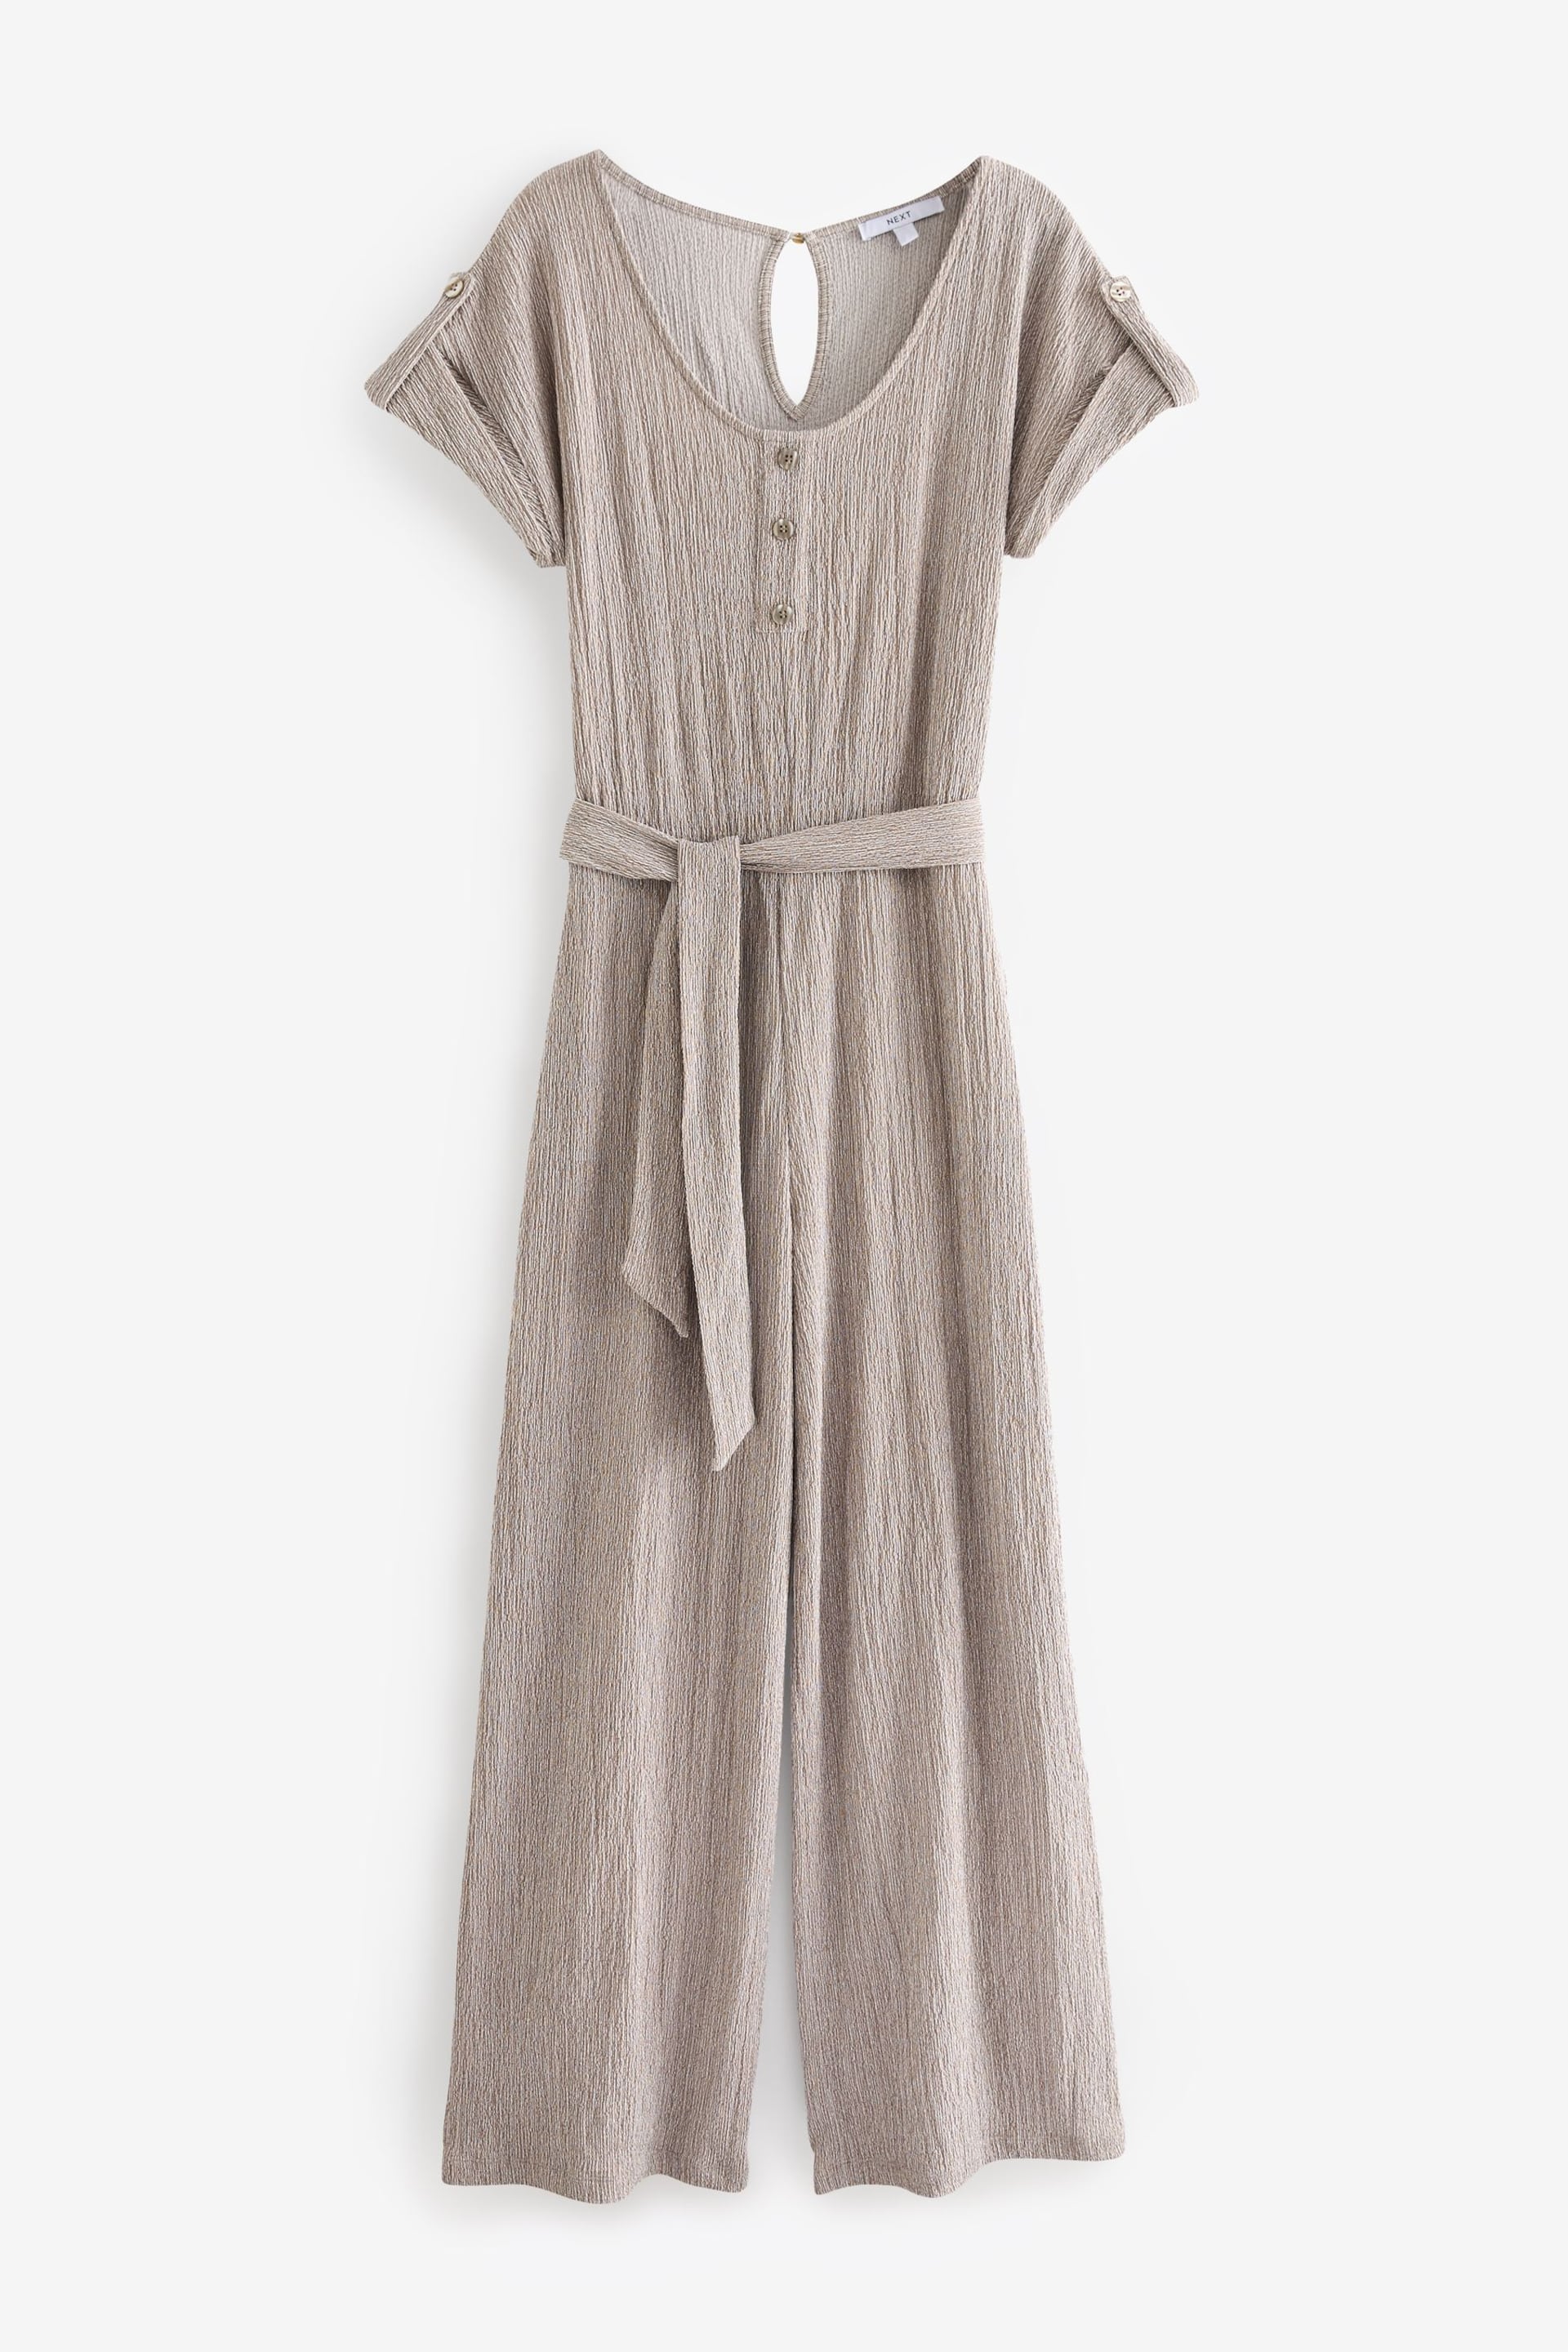 Stone Textured Utility Jumpsuit - Image 5 of 6